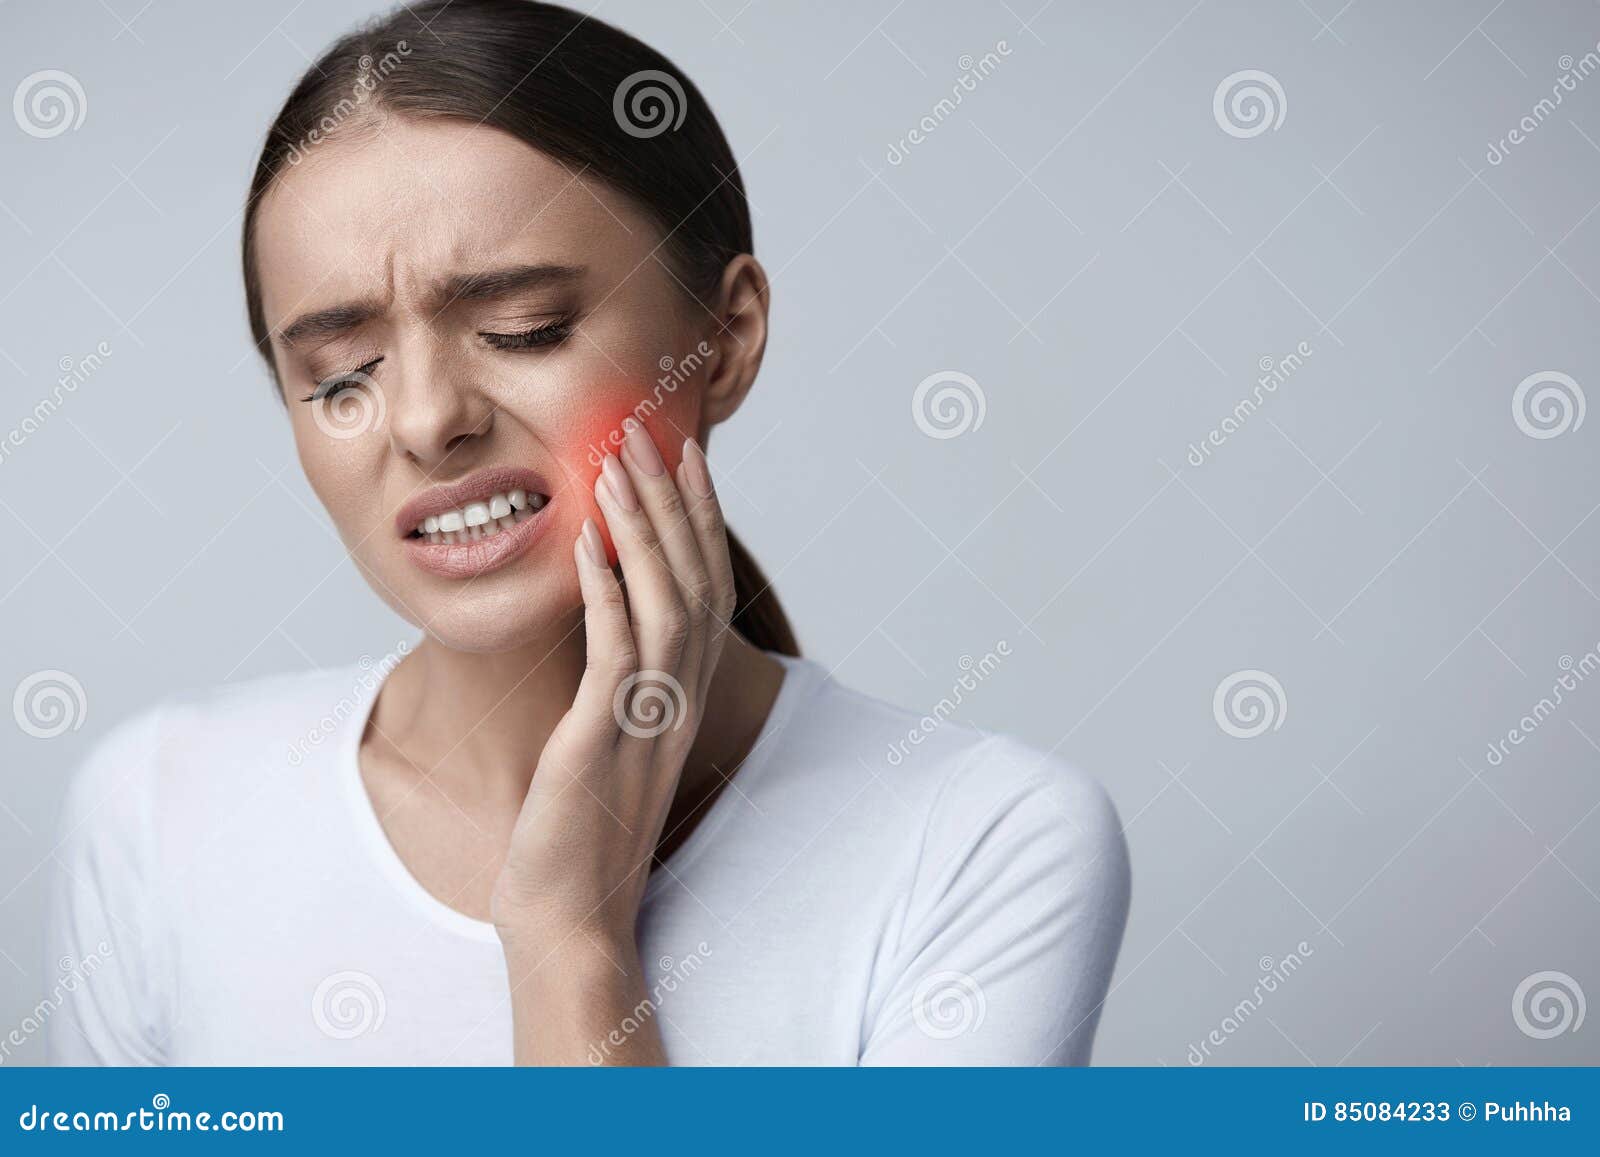 tooth pain. beautiful woman feeling strong pain, toothache